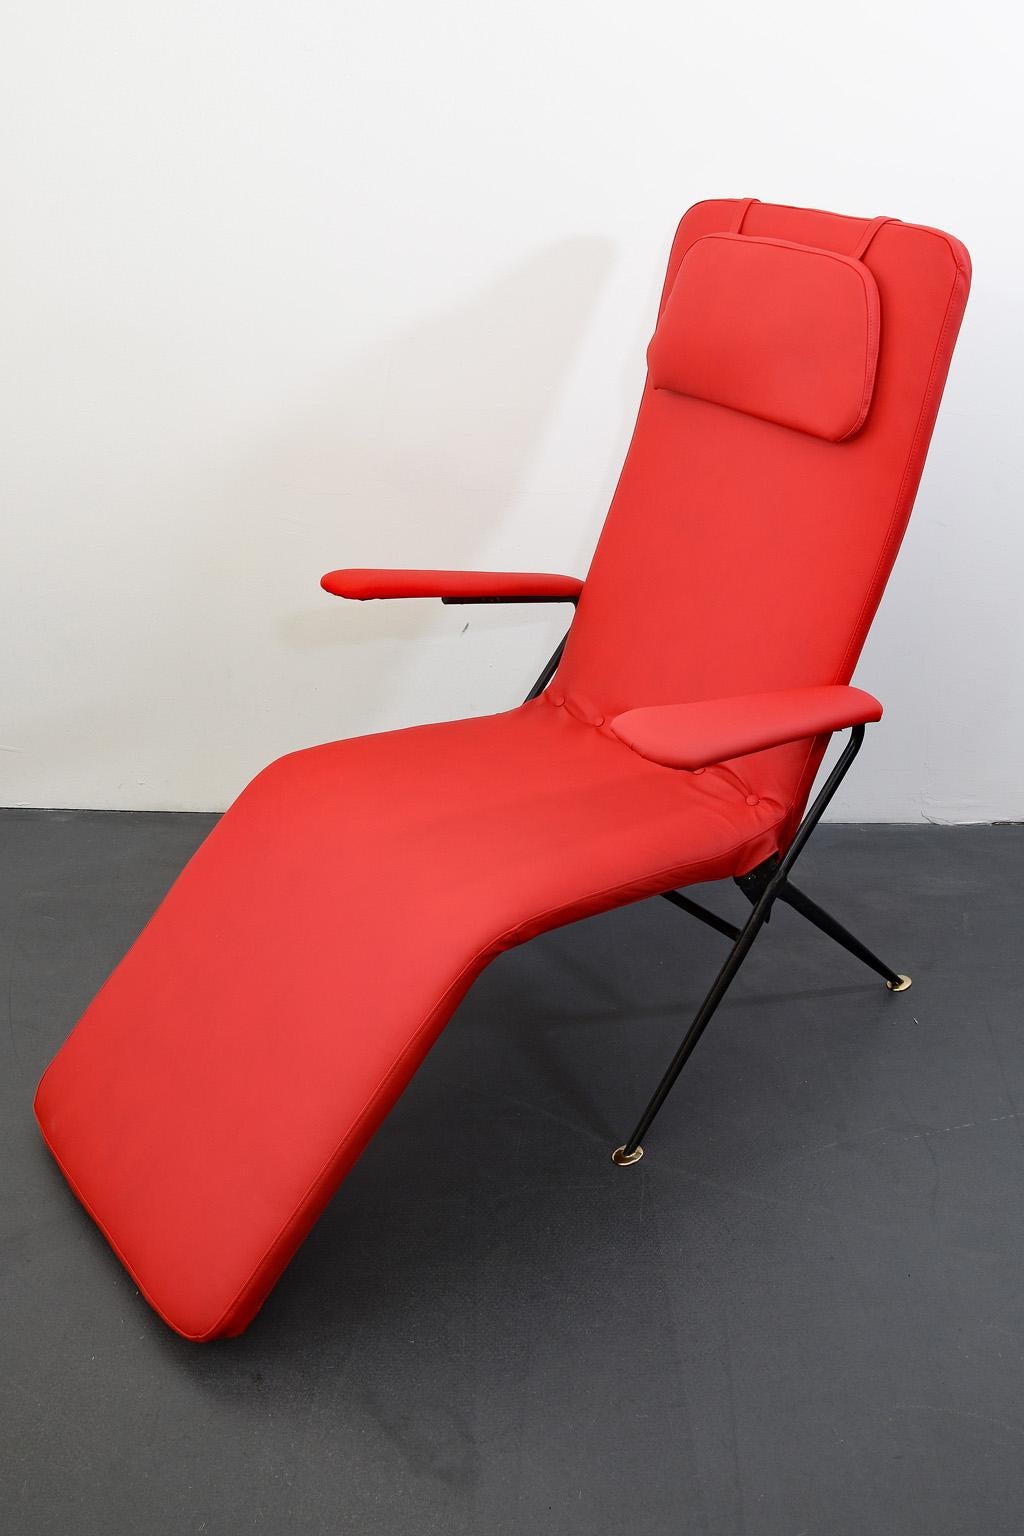 Mid-Century Modern Sunlounger / Deckchair in Red, Chaise Lounge / Capri Lounger, Italy, 1950s For Sale